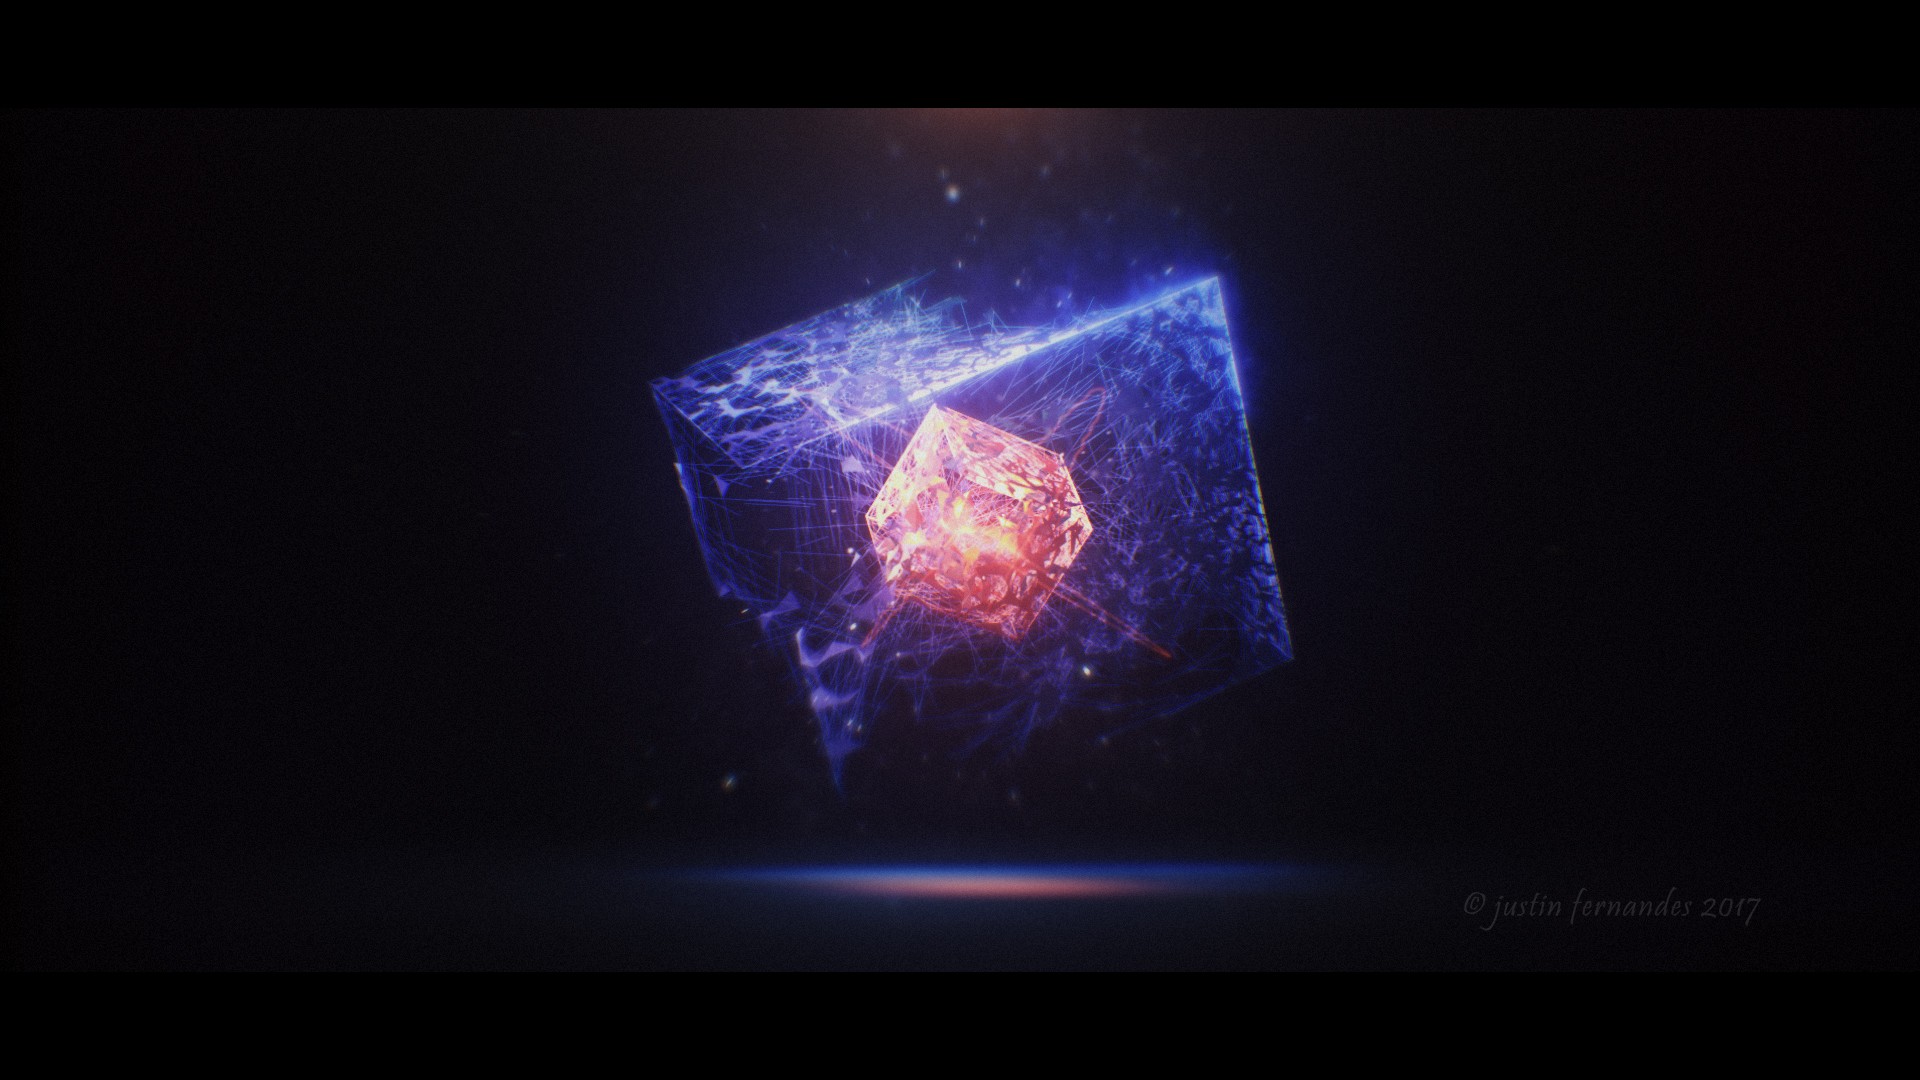 Abstract Pixel Art Artwork Disintegration Floating Particles Glowing Cube Reflection Floating Blurre 1920x1080